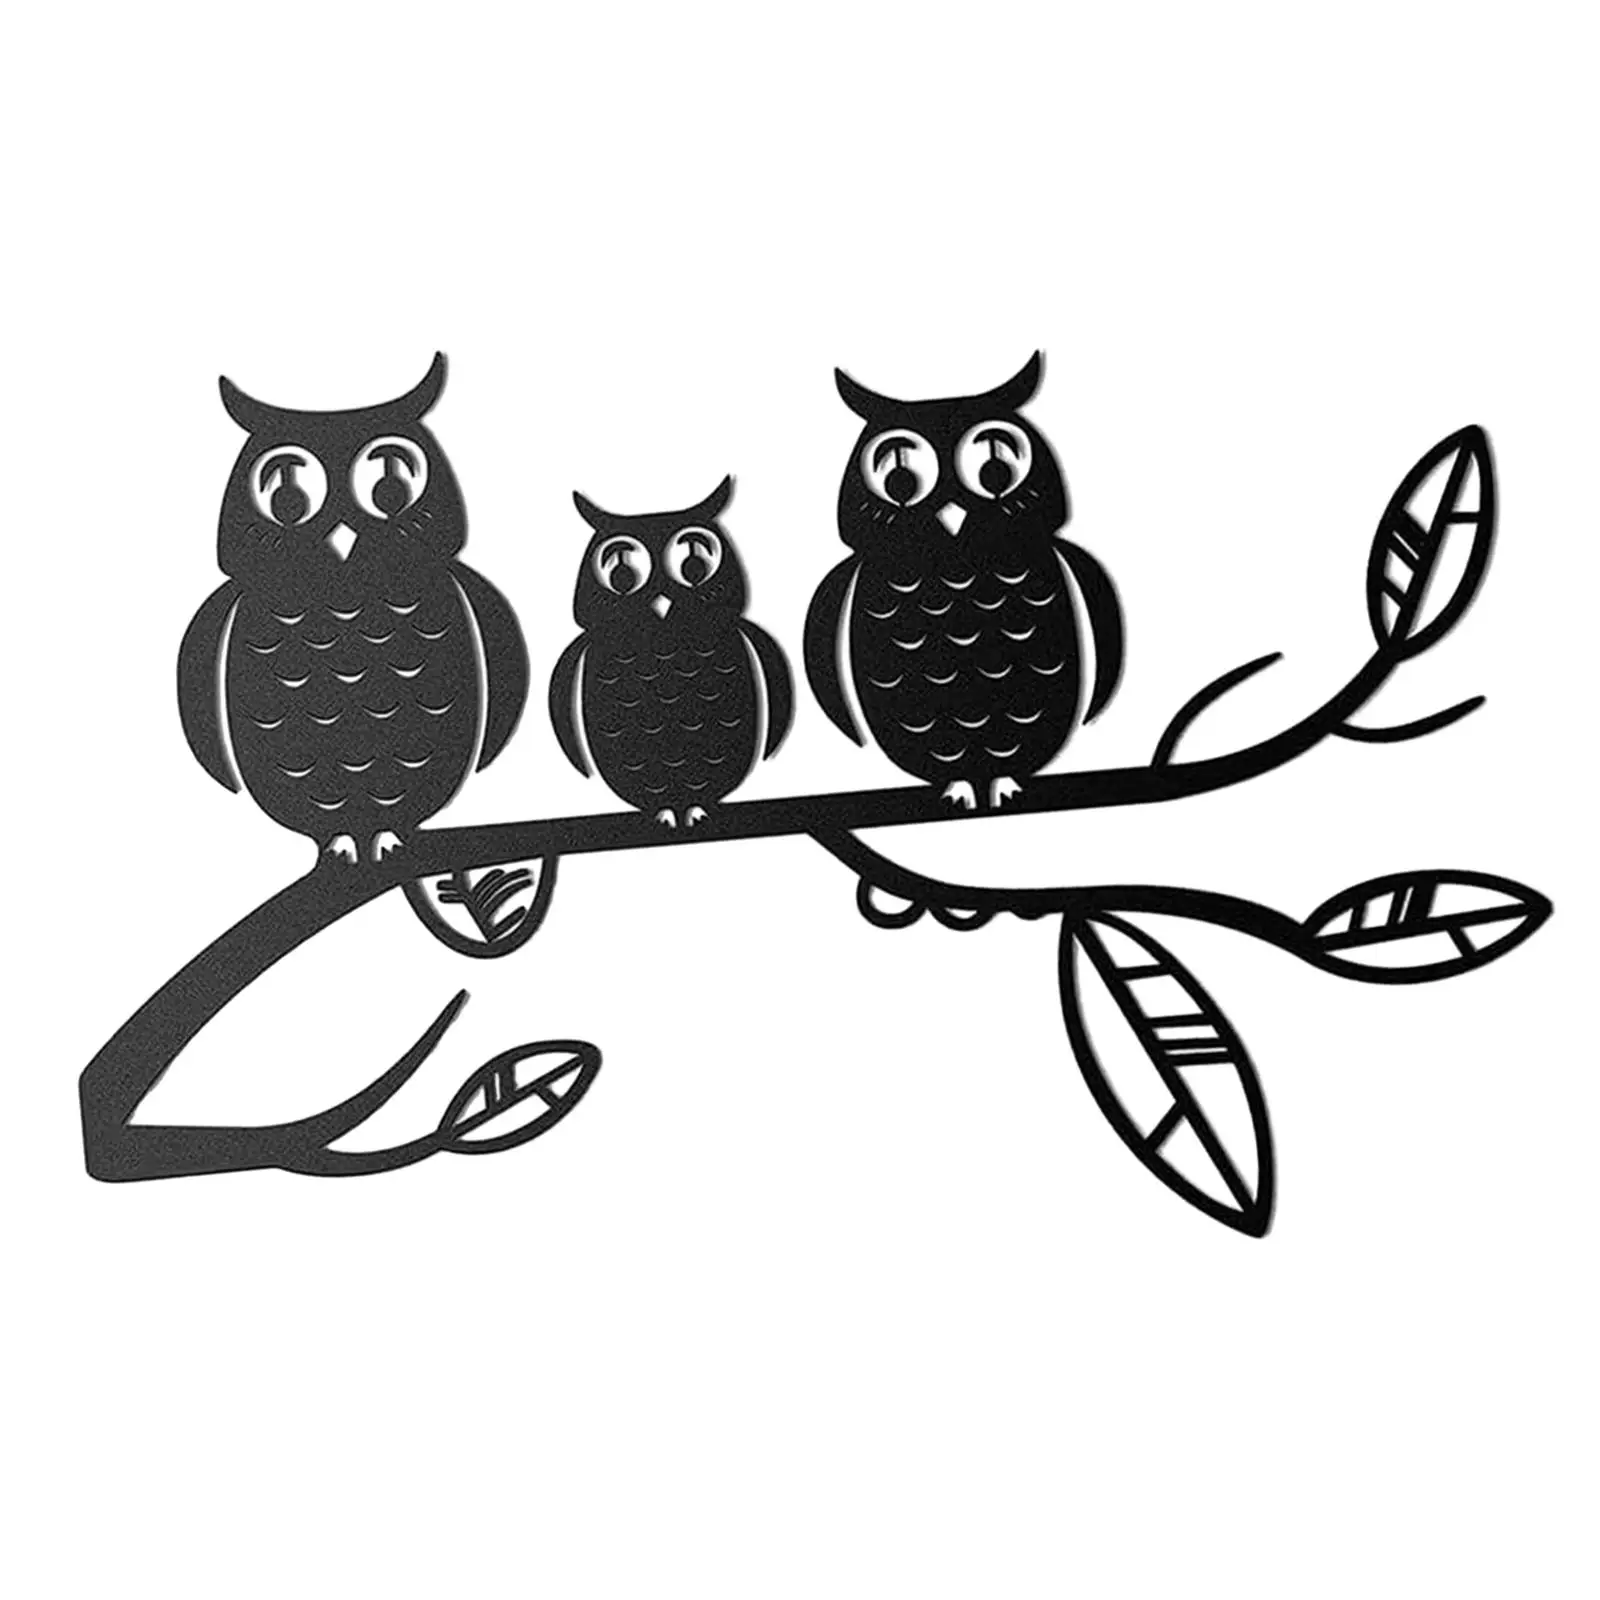 Owls Metal Wall Art Decor Rustic Iron Wall Decoration Home Decor Ornament for Front Door Farmhouse Garden Fence Living Room